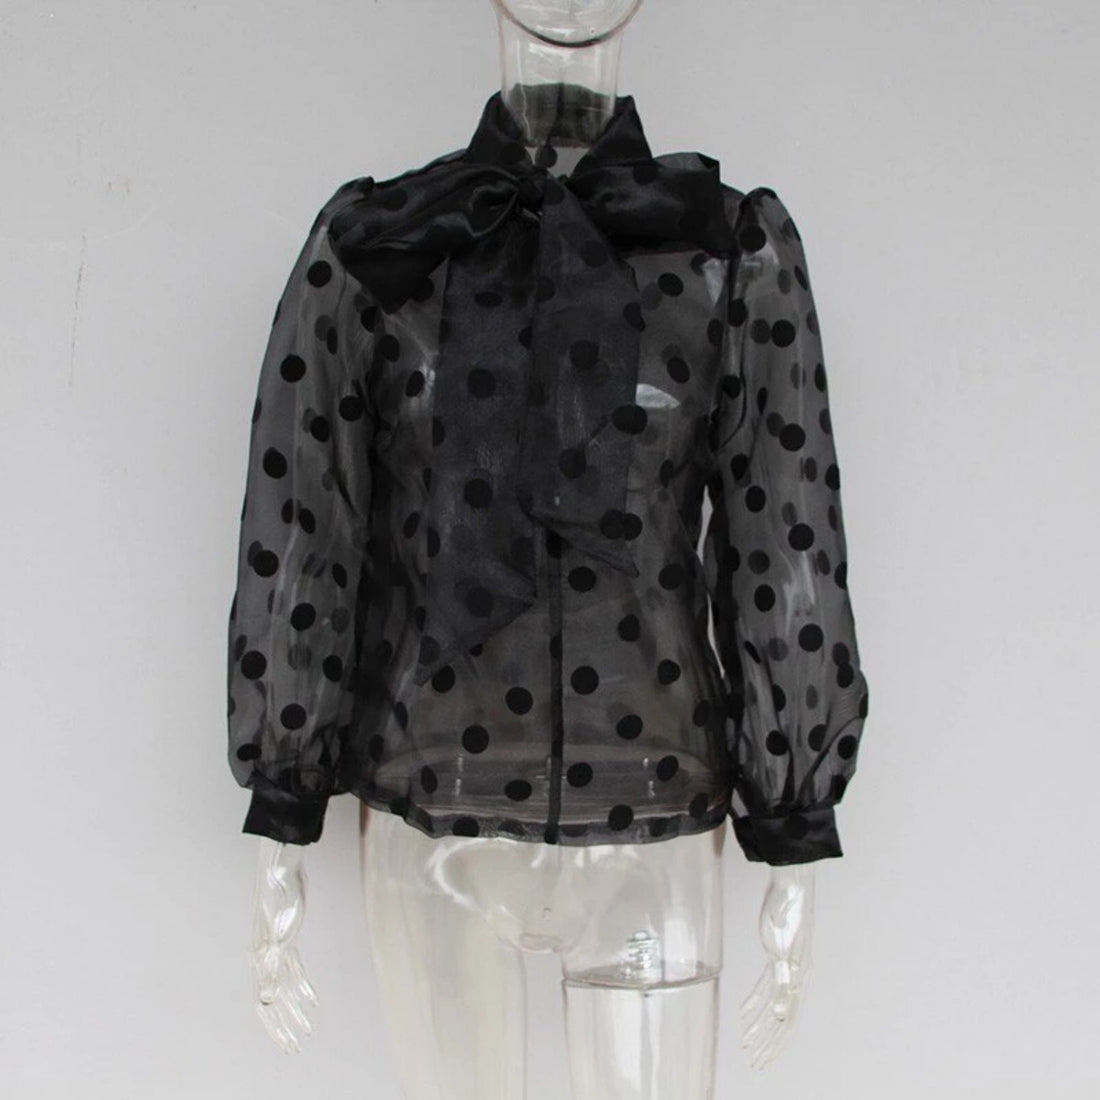 Women's Polyester Long-Sleeved Blouse With Polka Dot Print